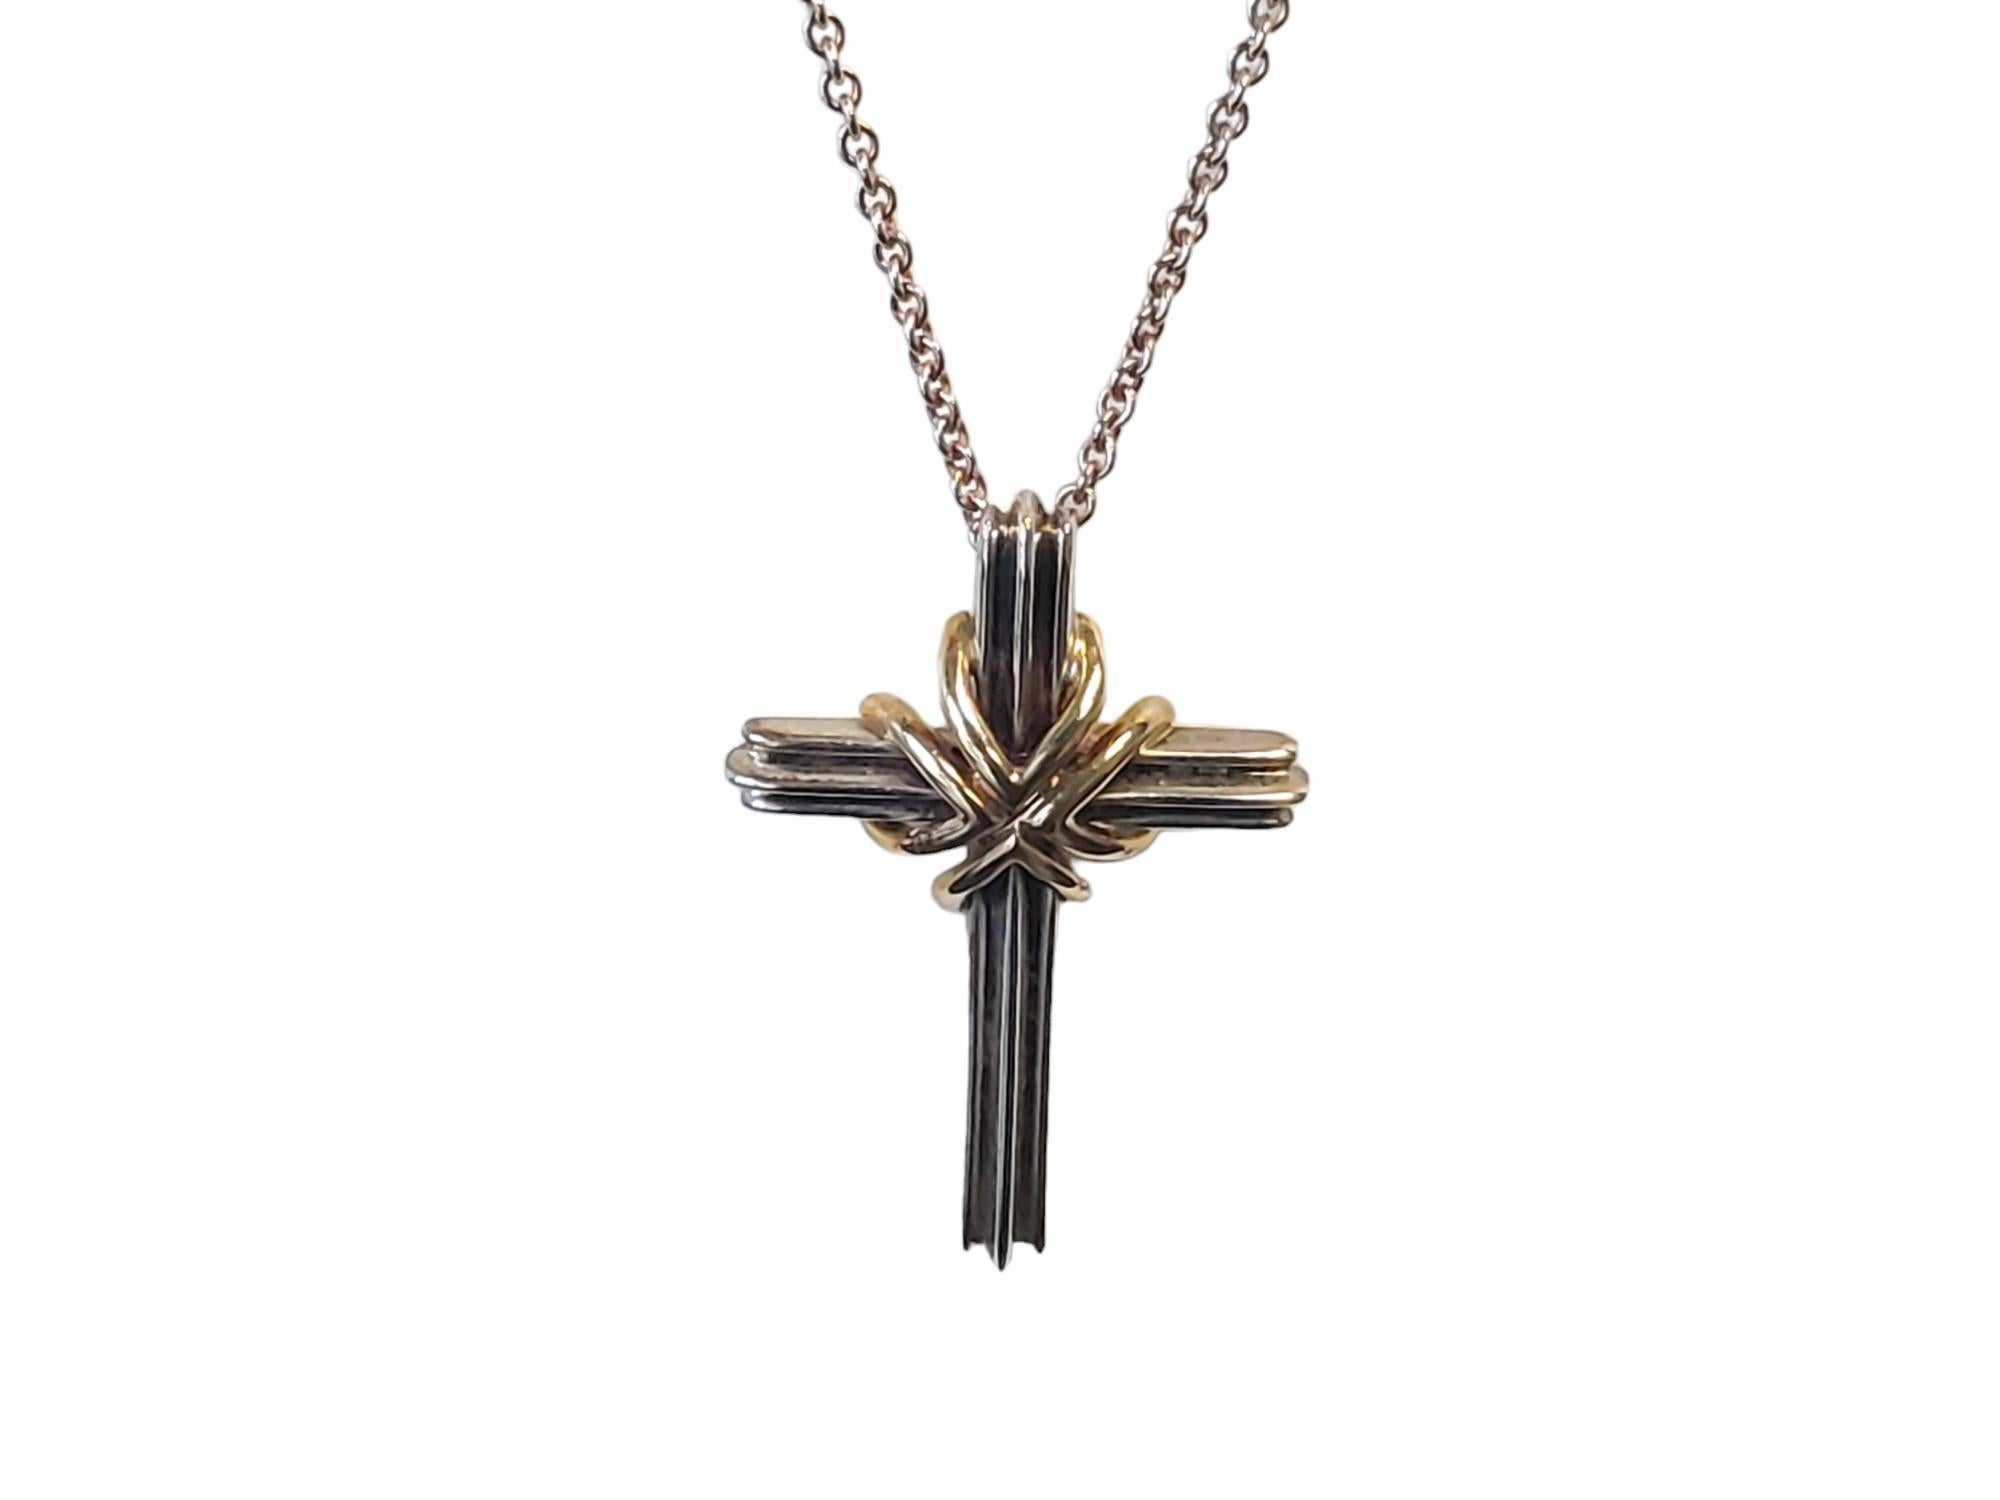 Vintage Tiffany Sterling 18k Croix et Collier

Listed is a vintage Tiffany & Co. sterling and 18k yellow gold cross with 24